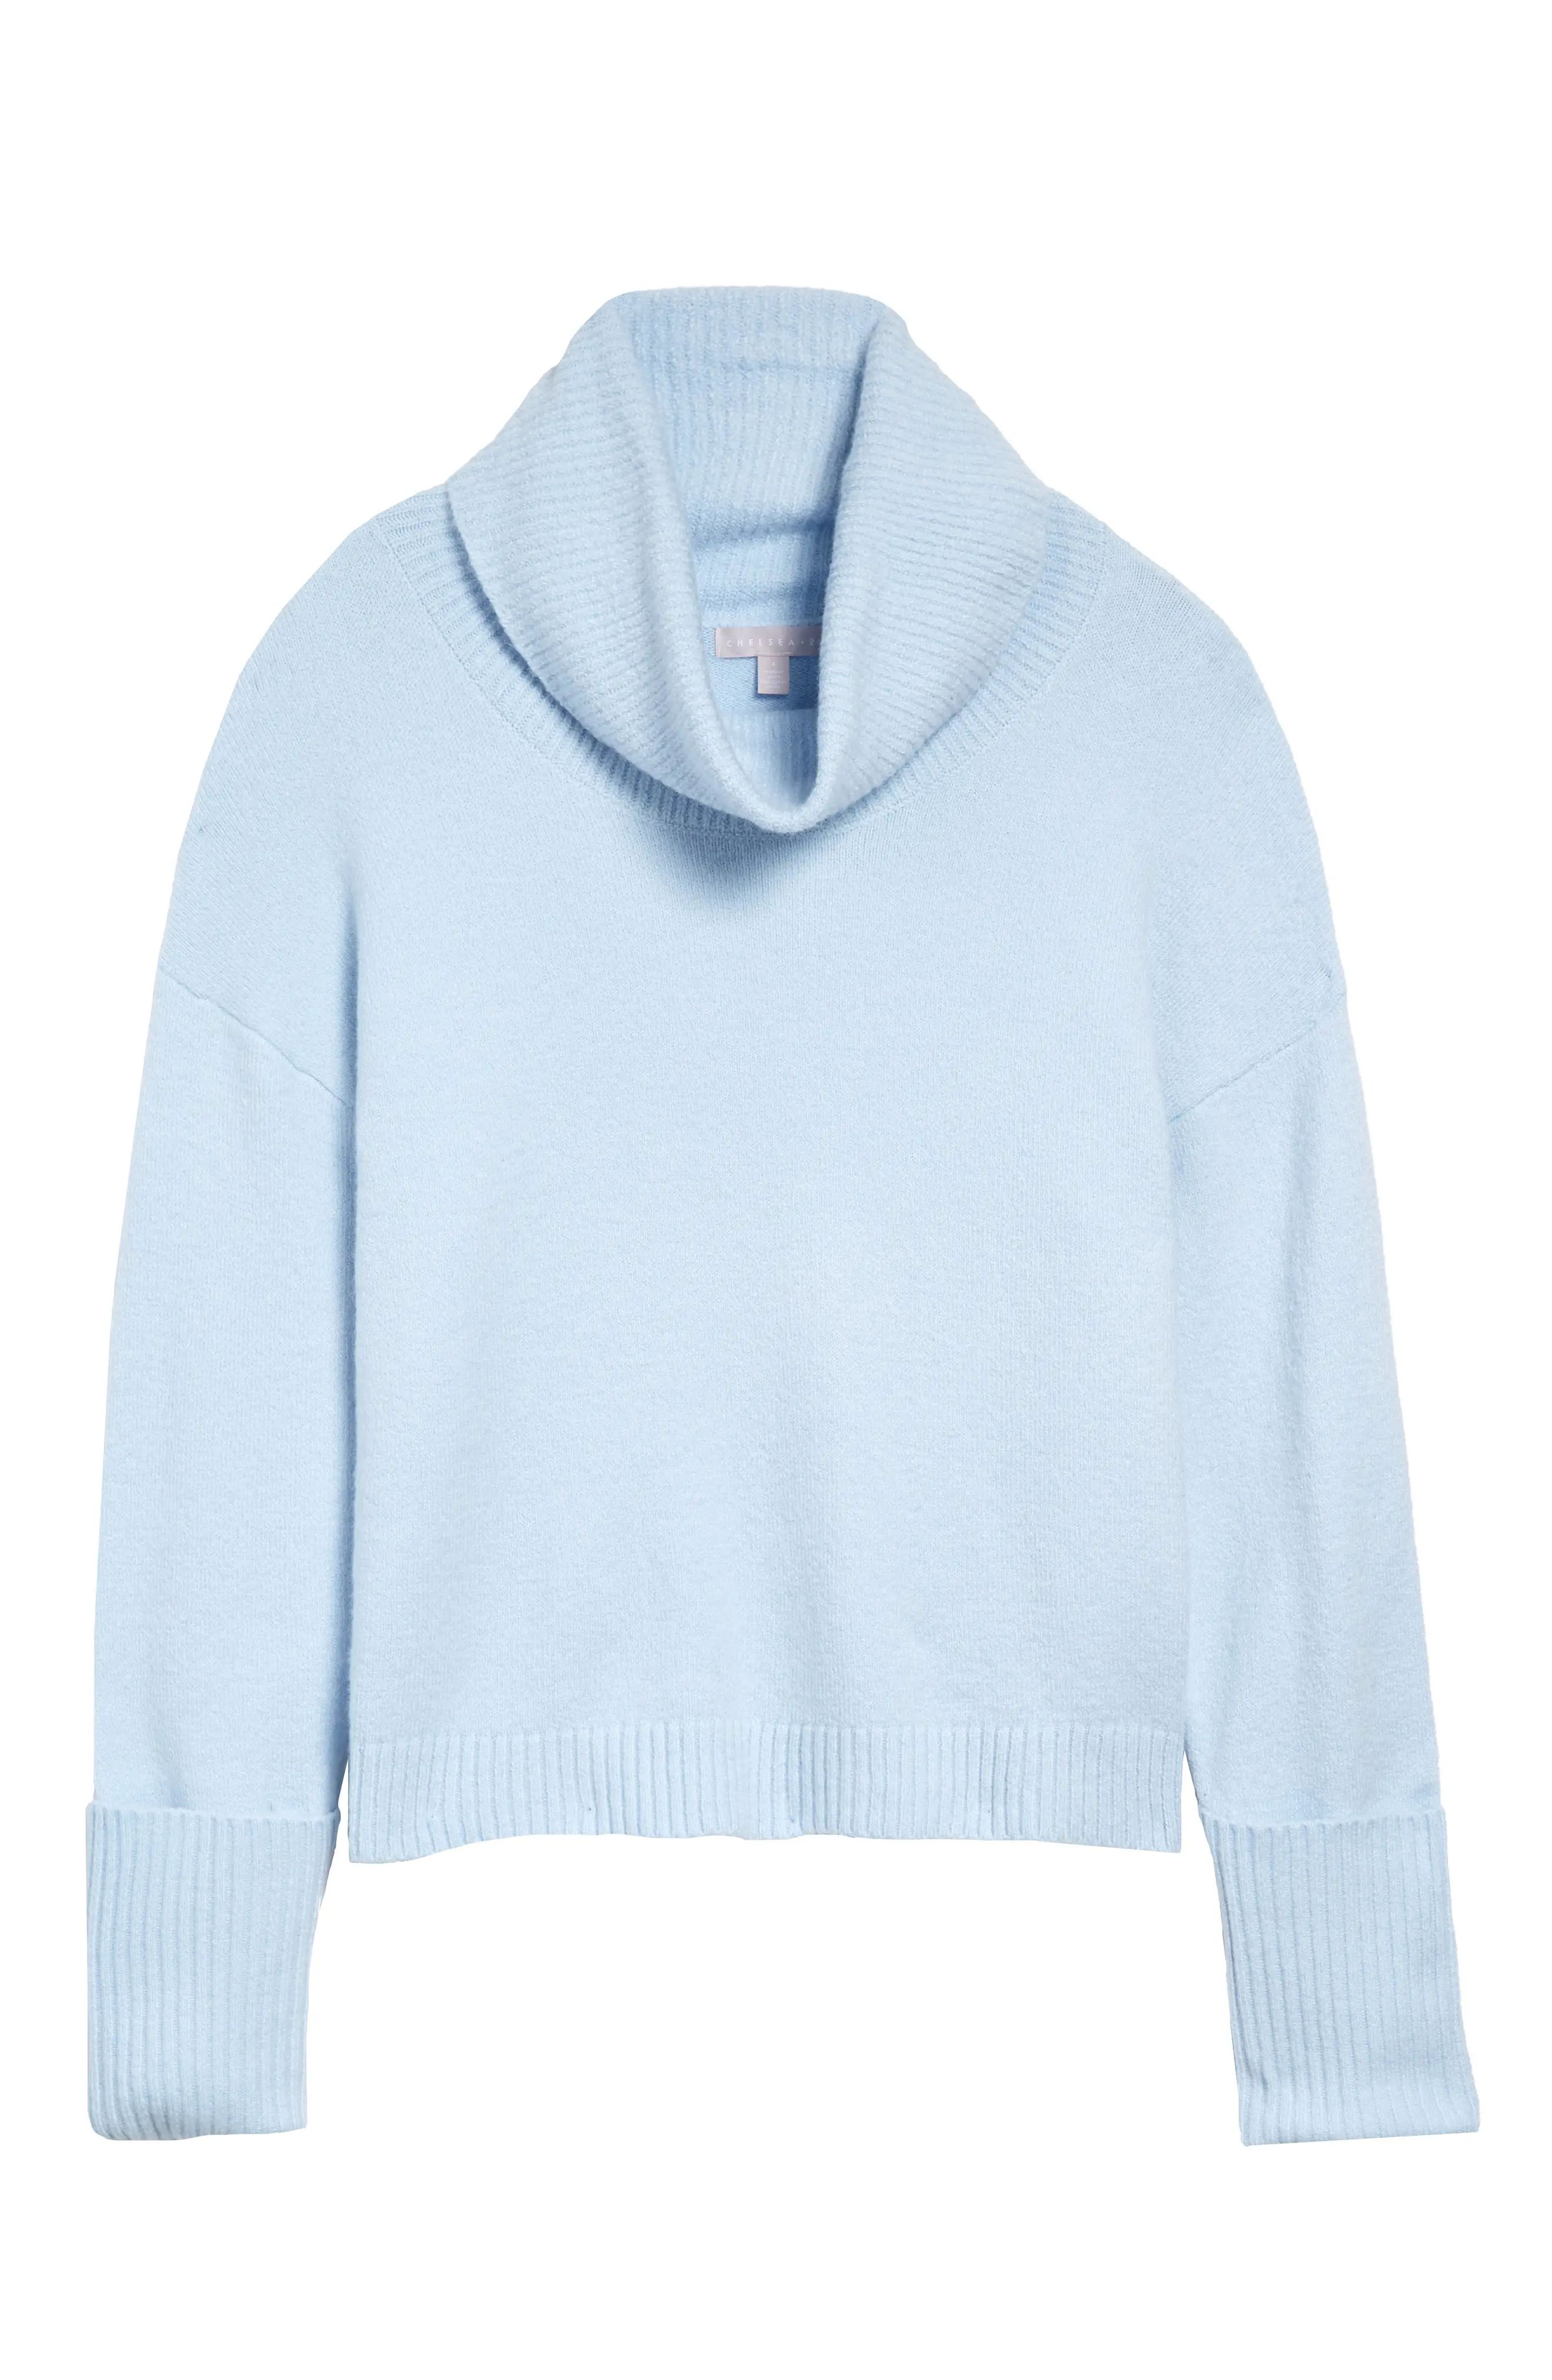 Women's Chelsea28 Cowl Neck Sweater, Size X-Large - Blue | Nordstrom